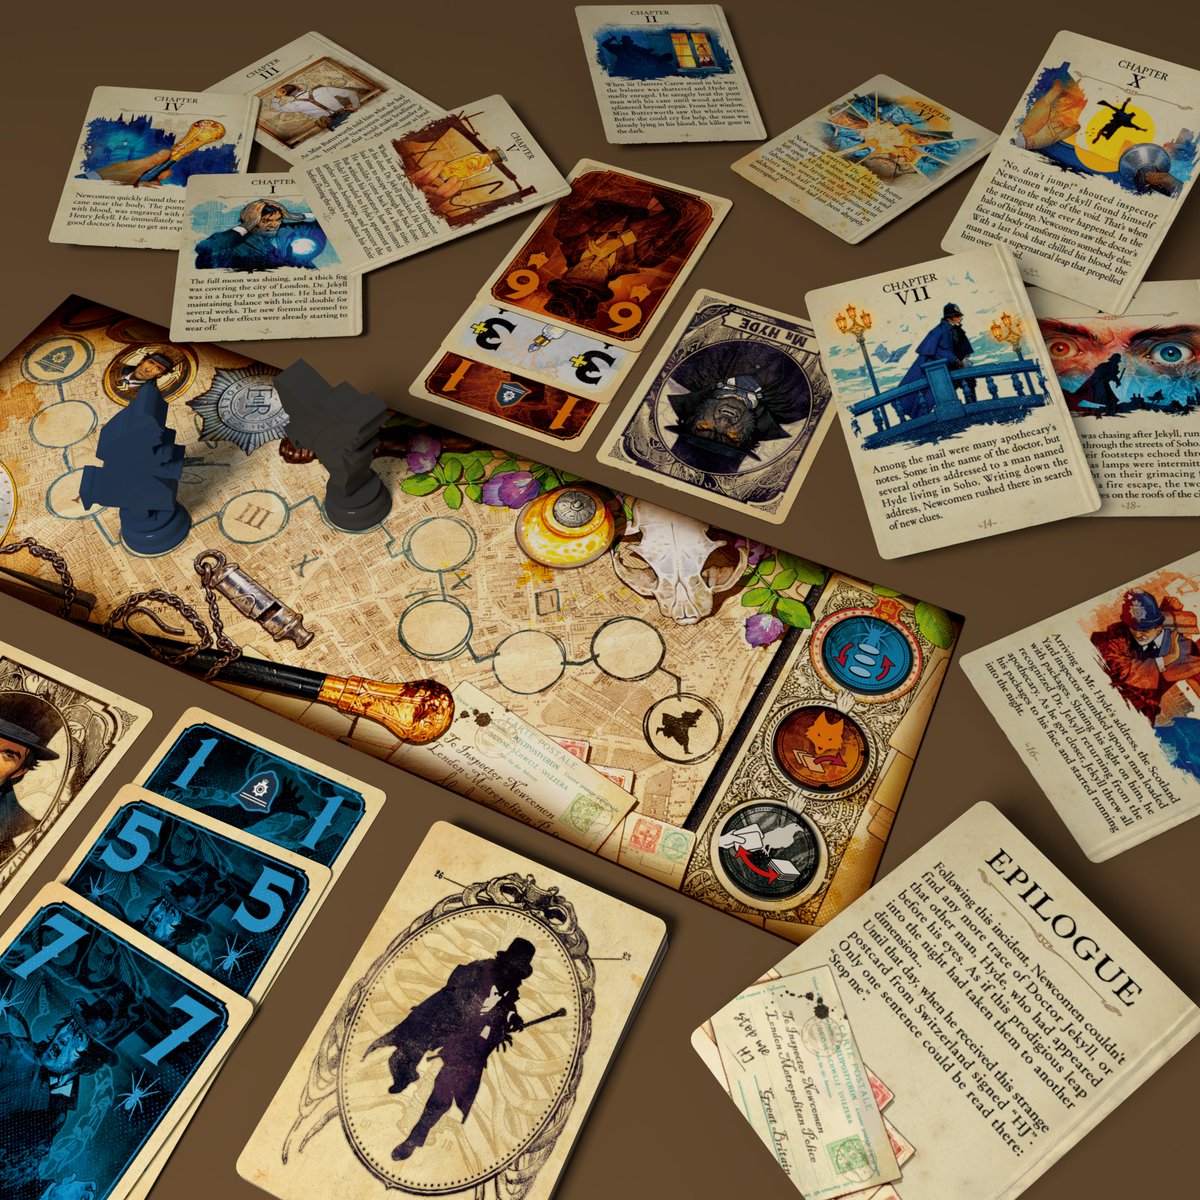 There are 10 chapter cards which give you nice narratives with stunning art by #VincentDutrait and unique chapter rules by #OlivierCipiere and #GaetanBeaujannot. They're attractively challenging! Meet Jekyll & Hyde vs Scotland Yard in #Spiel '23. Meet Mandoo at #5A132